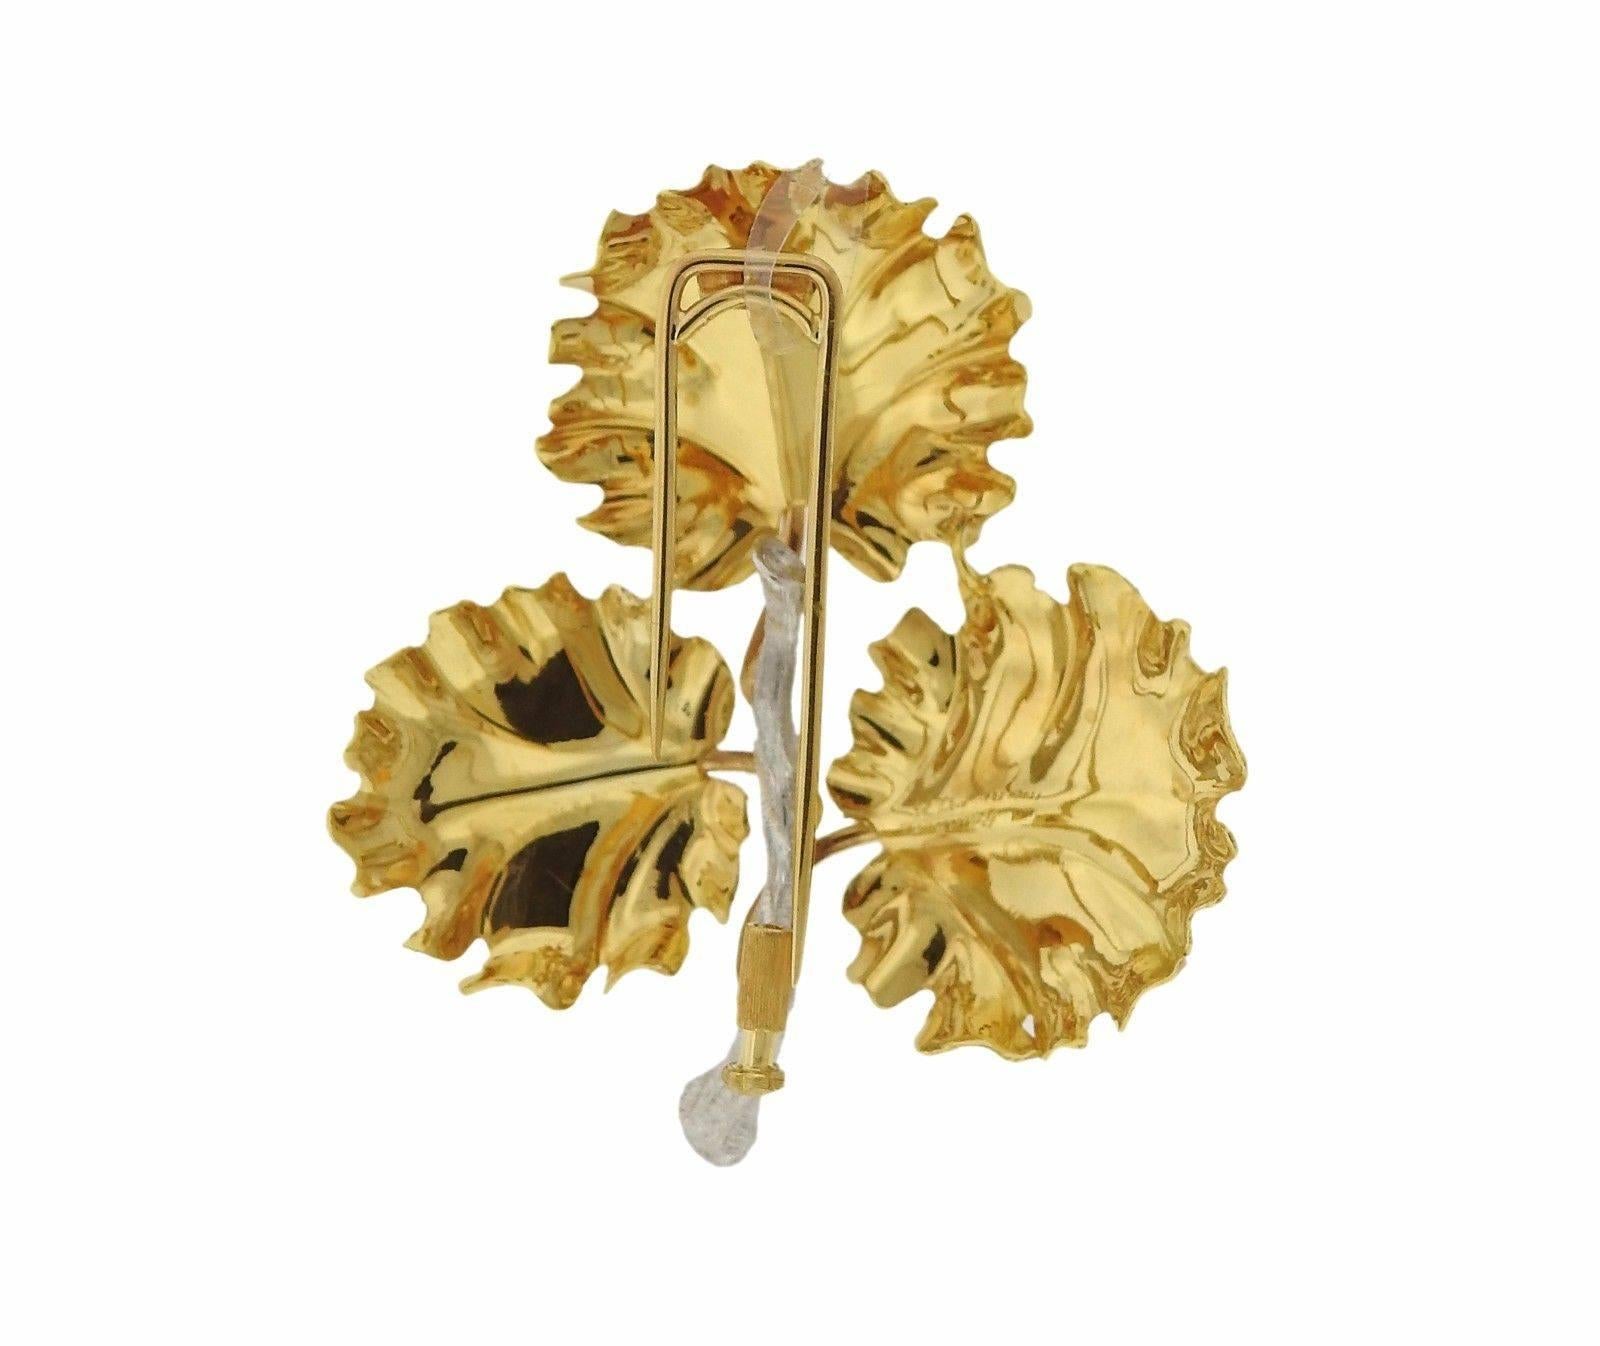 An 18K yellow, rose and white gold leaf motif brooch.  The brooch measures 46mm x 41mm.  The weight of the piece is 9.6 grams. Marked: 18K, Italy, Buccellati.  The brooch comes with box and Buccellati paperwork.  Retail is $9120.